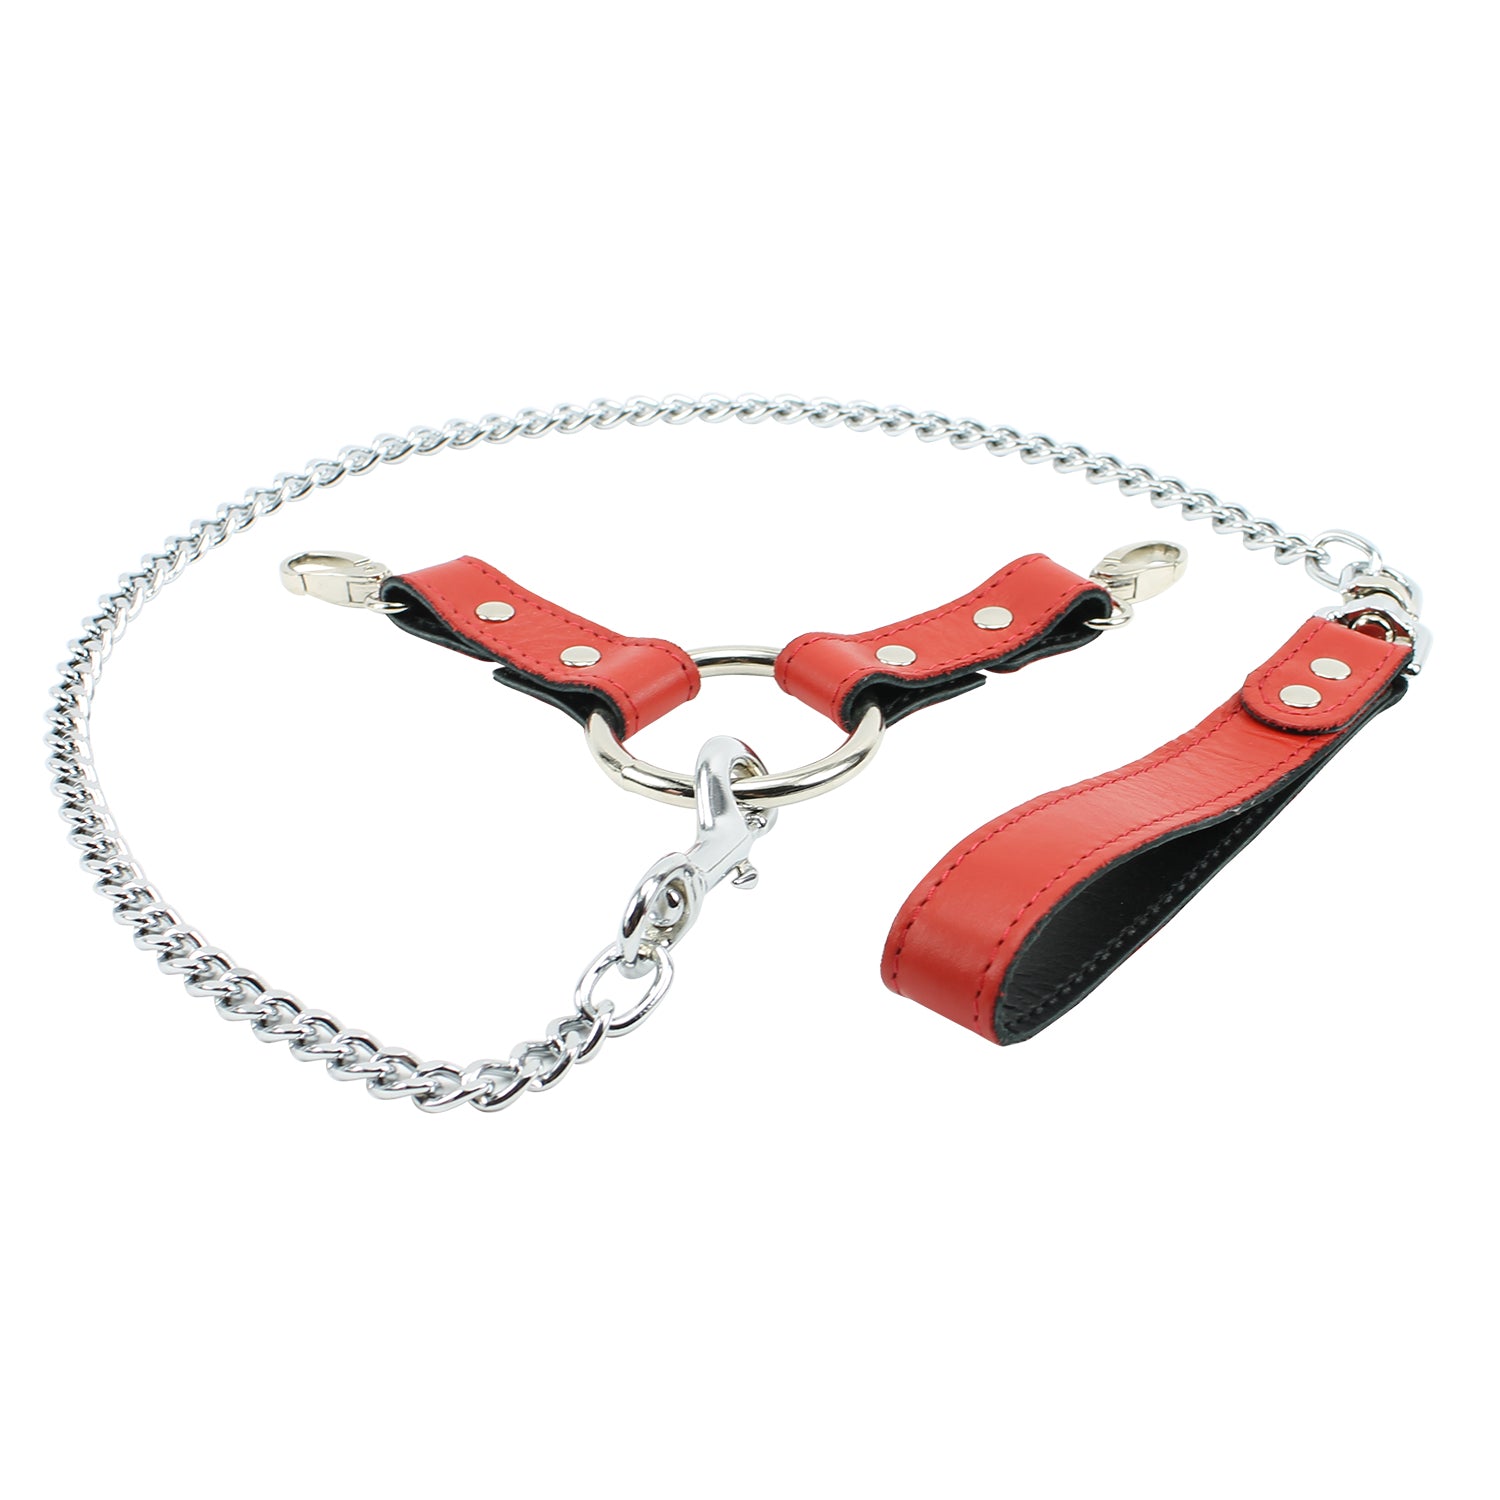 Berlin Red Leather 2-point hogtie set